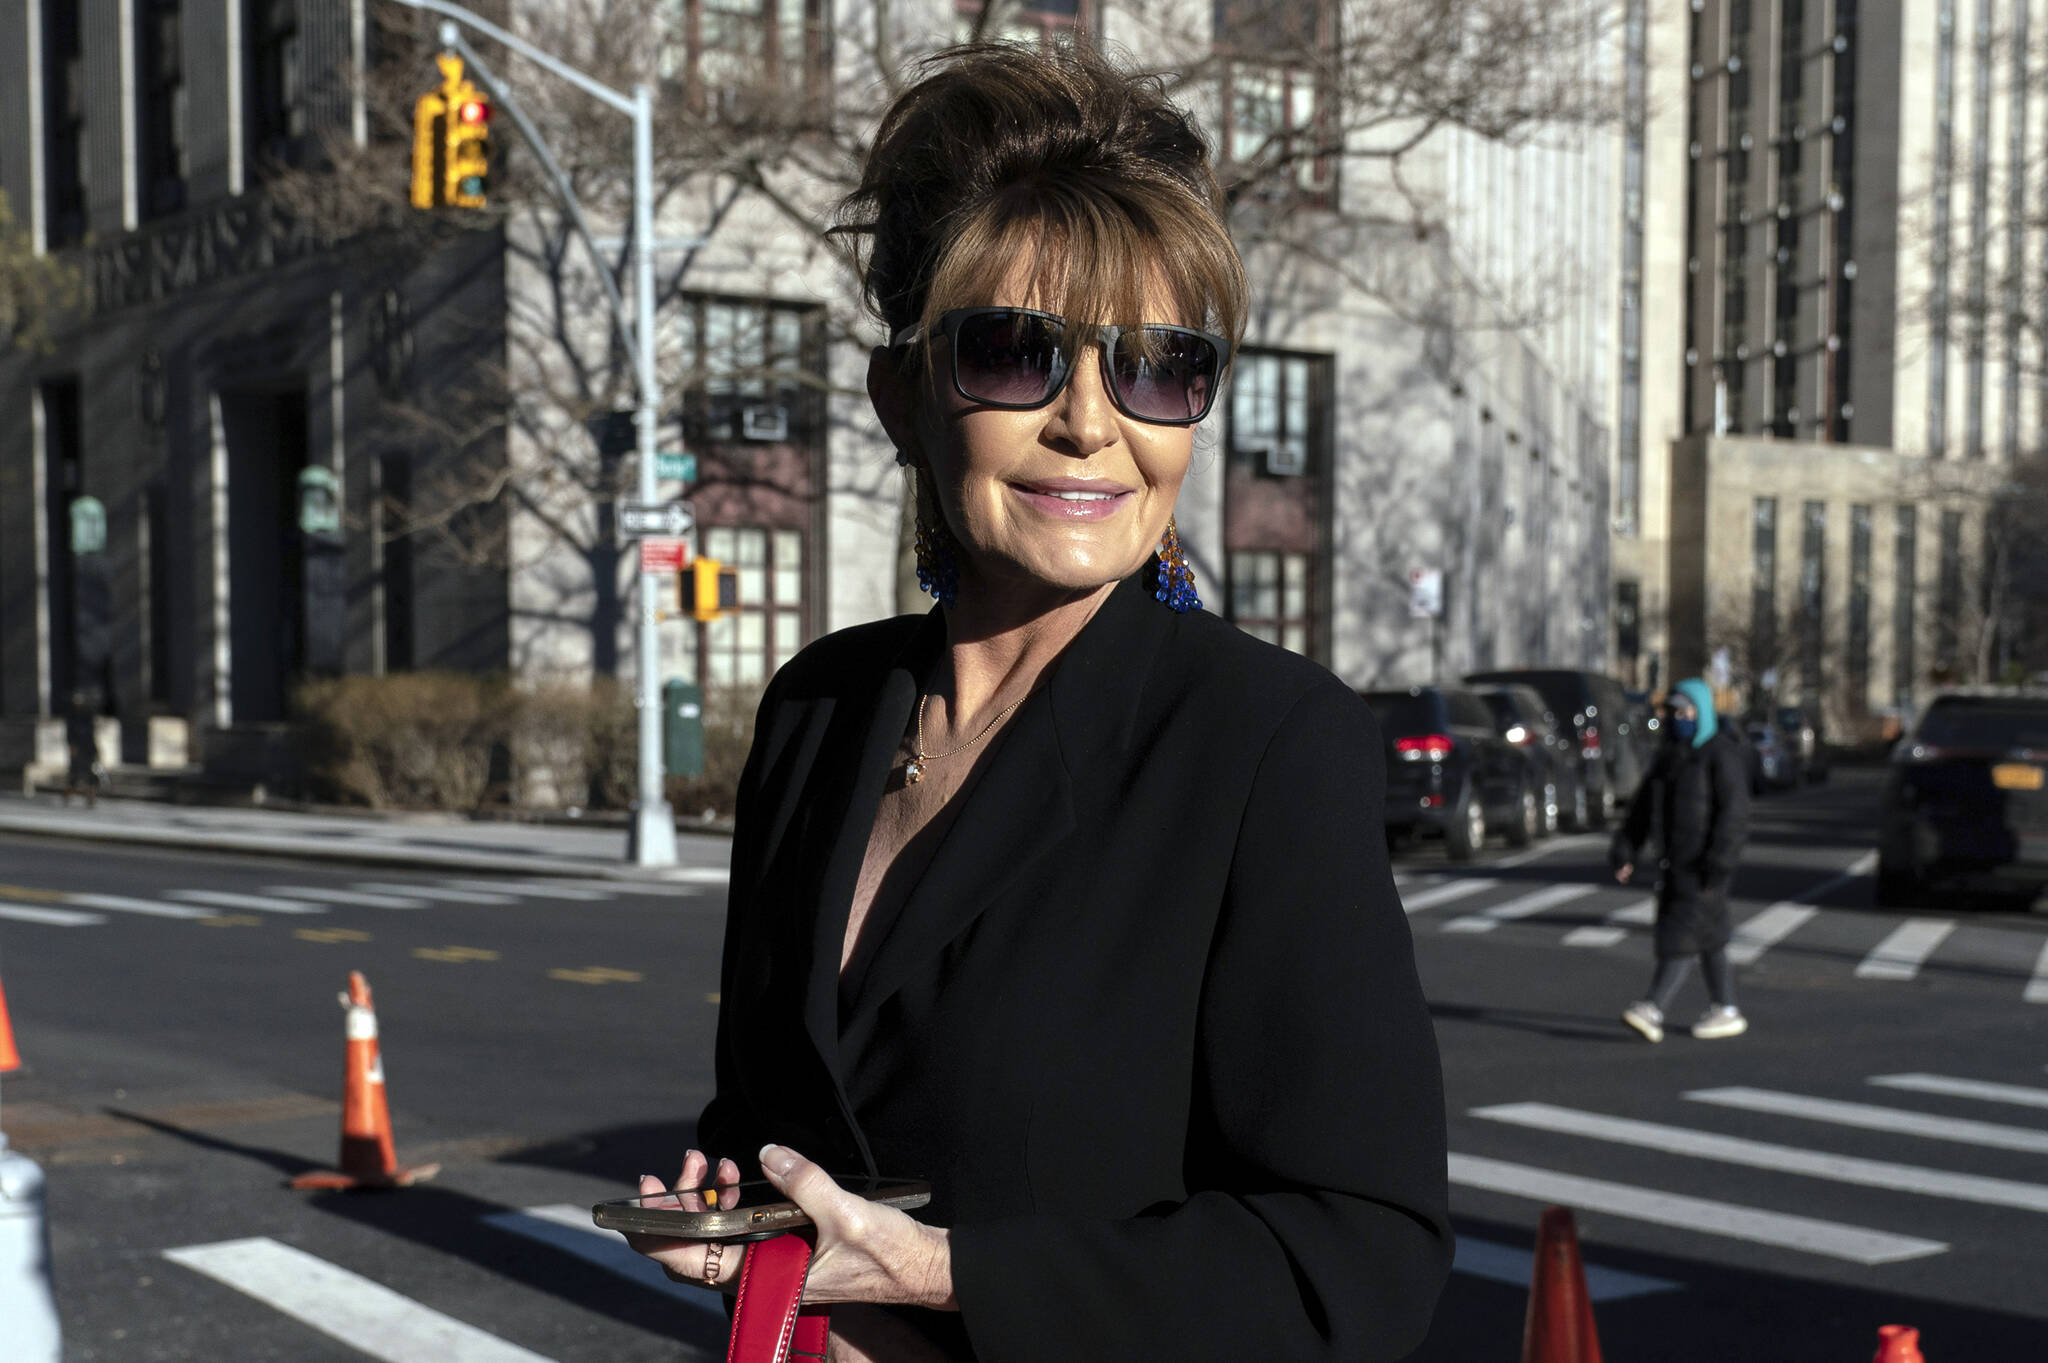 Former Alaska Gov. Sarah Palin arrives at federal court in New York, Feb. 11, 2022. A judge said Monday he’ll dismiss a libel lawsuit that Palin filed against The New York Times, saying Palin had failed to show that The Times had acted out of malice, something required in libel lawsuits involving public figures. (AP Photo / Jeenah Moon)